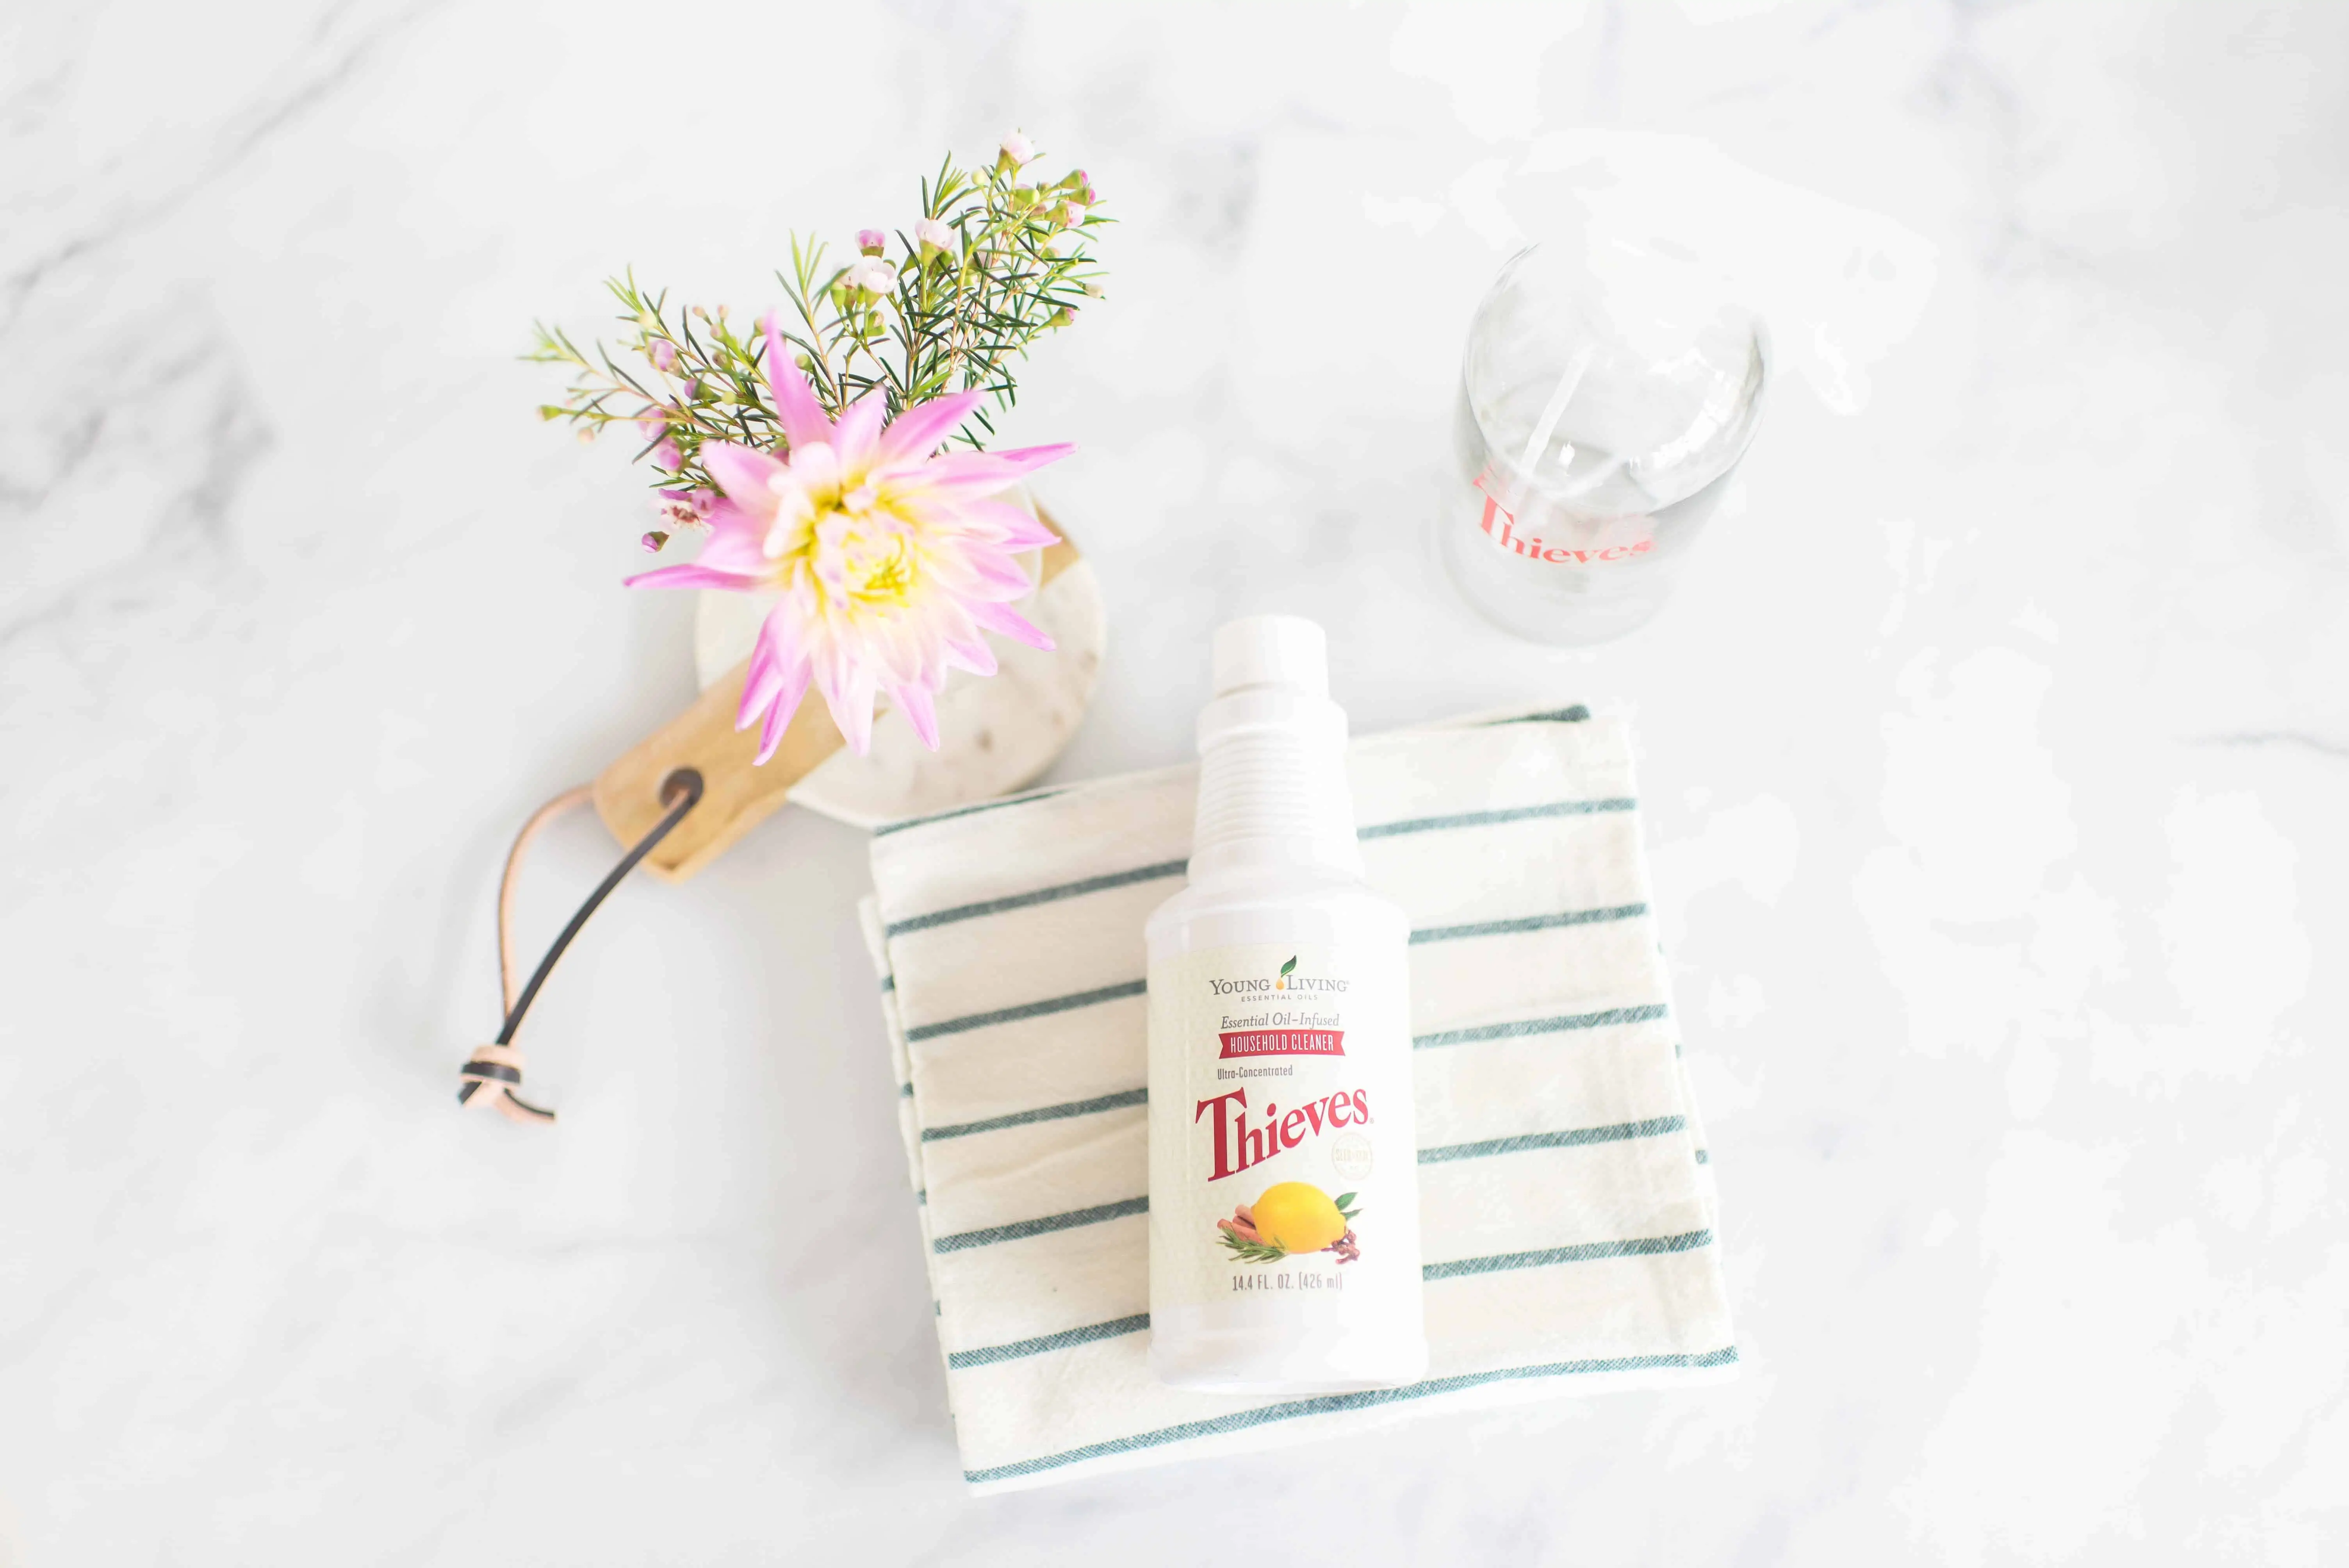  Get a FREE Bottle of Thieves Household Cleaner 